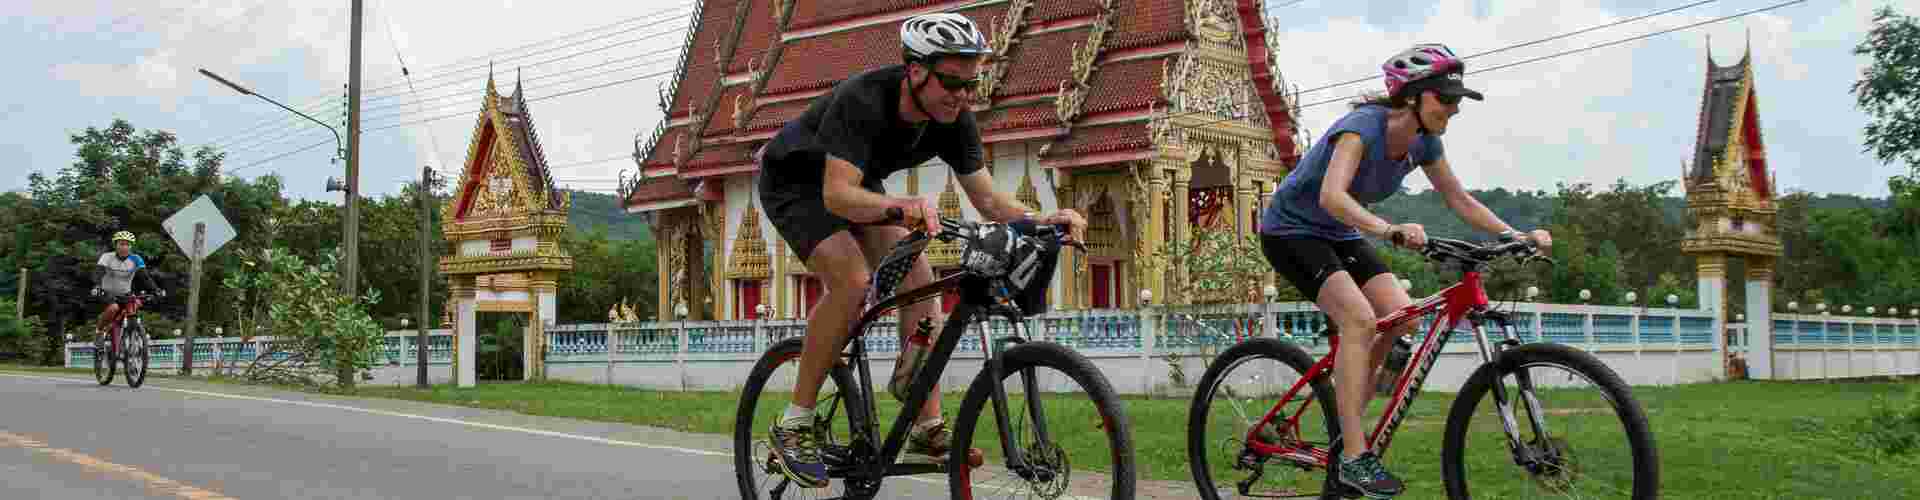 Intrepid cyclists riding past a temple in Thailand